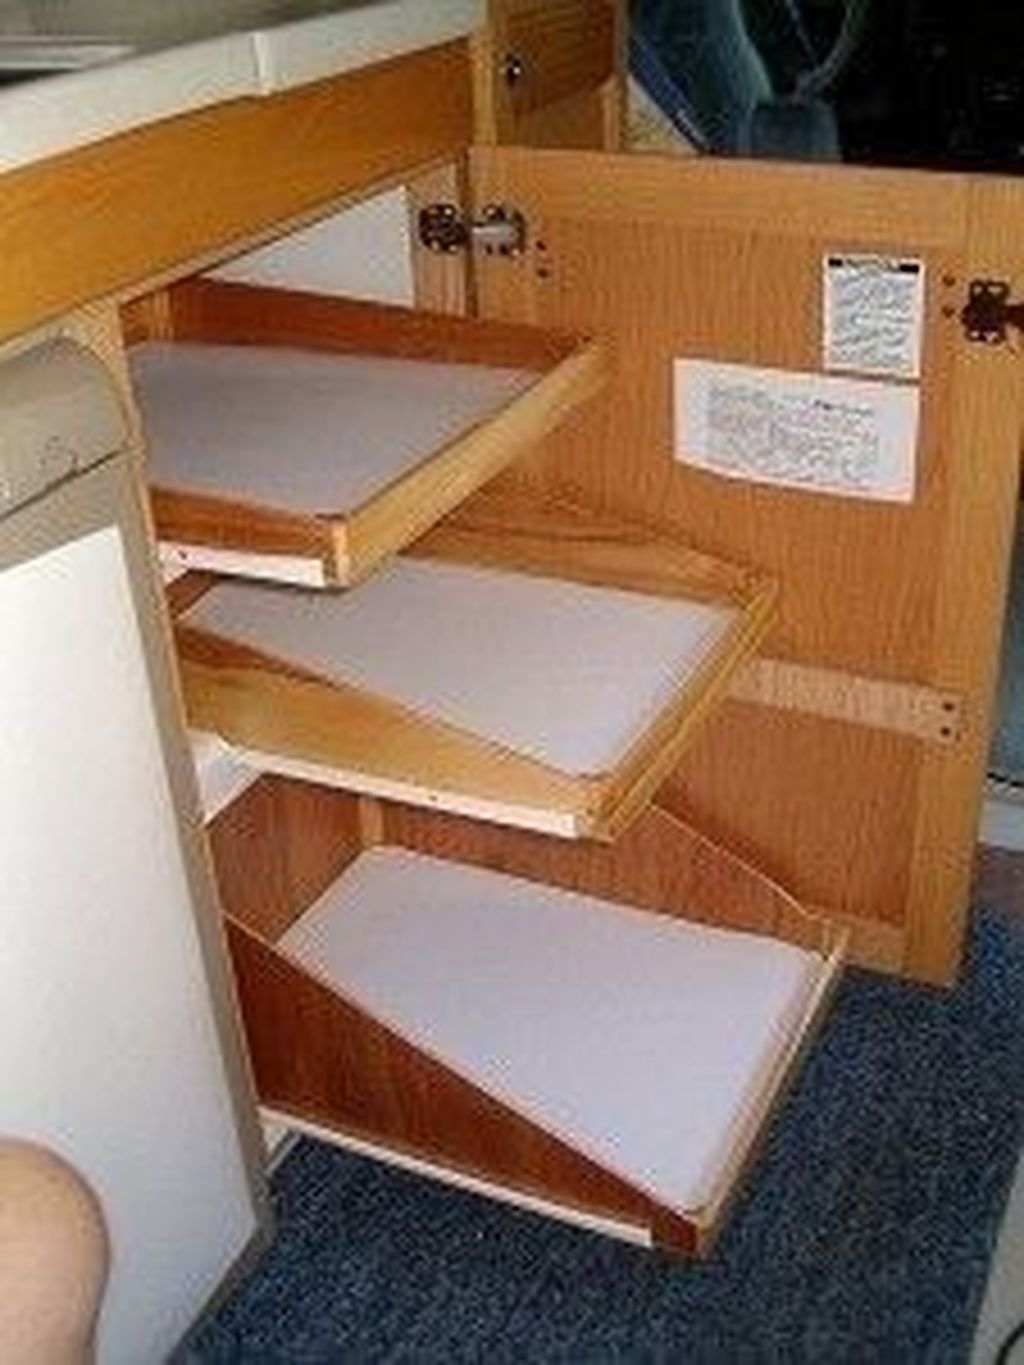 Best RV Kitchen Storage Ideas For Cozy Cook When The Camping 46